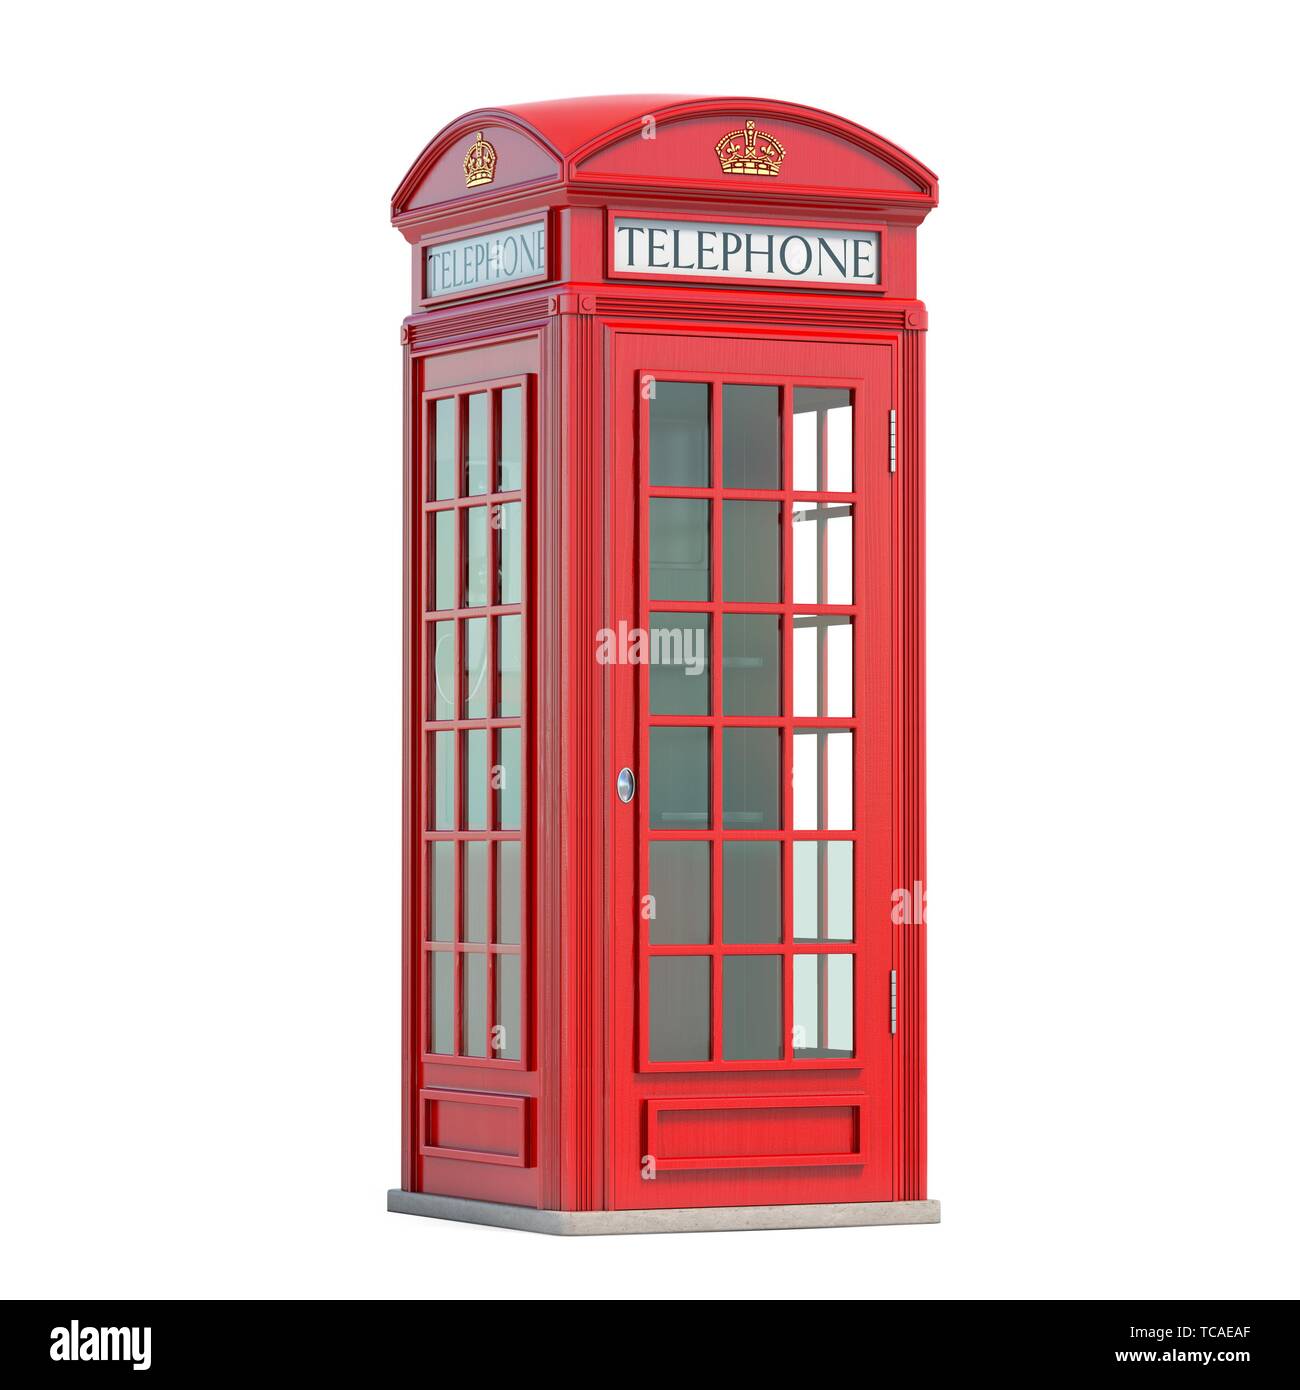 London Red Phone Booth Dictionary Art Print Architecture 